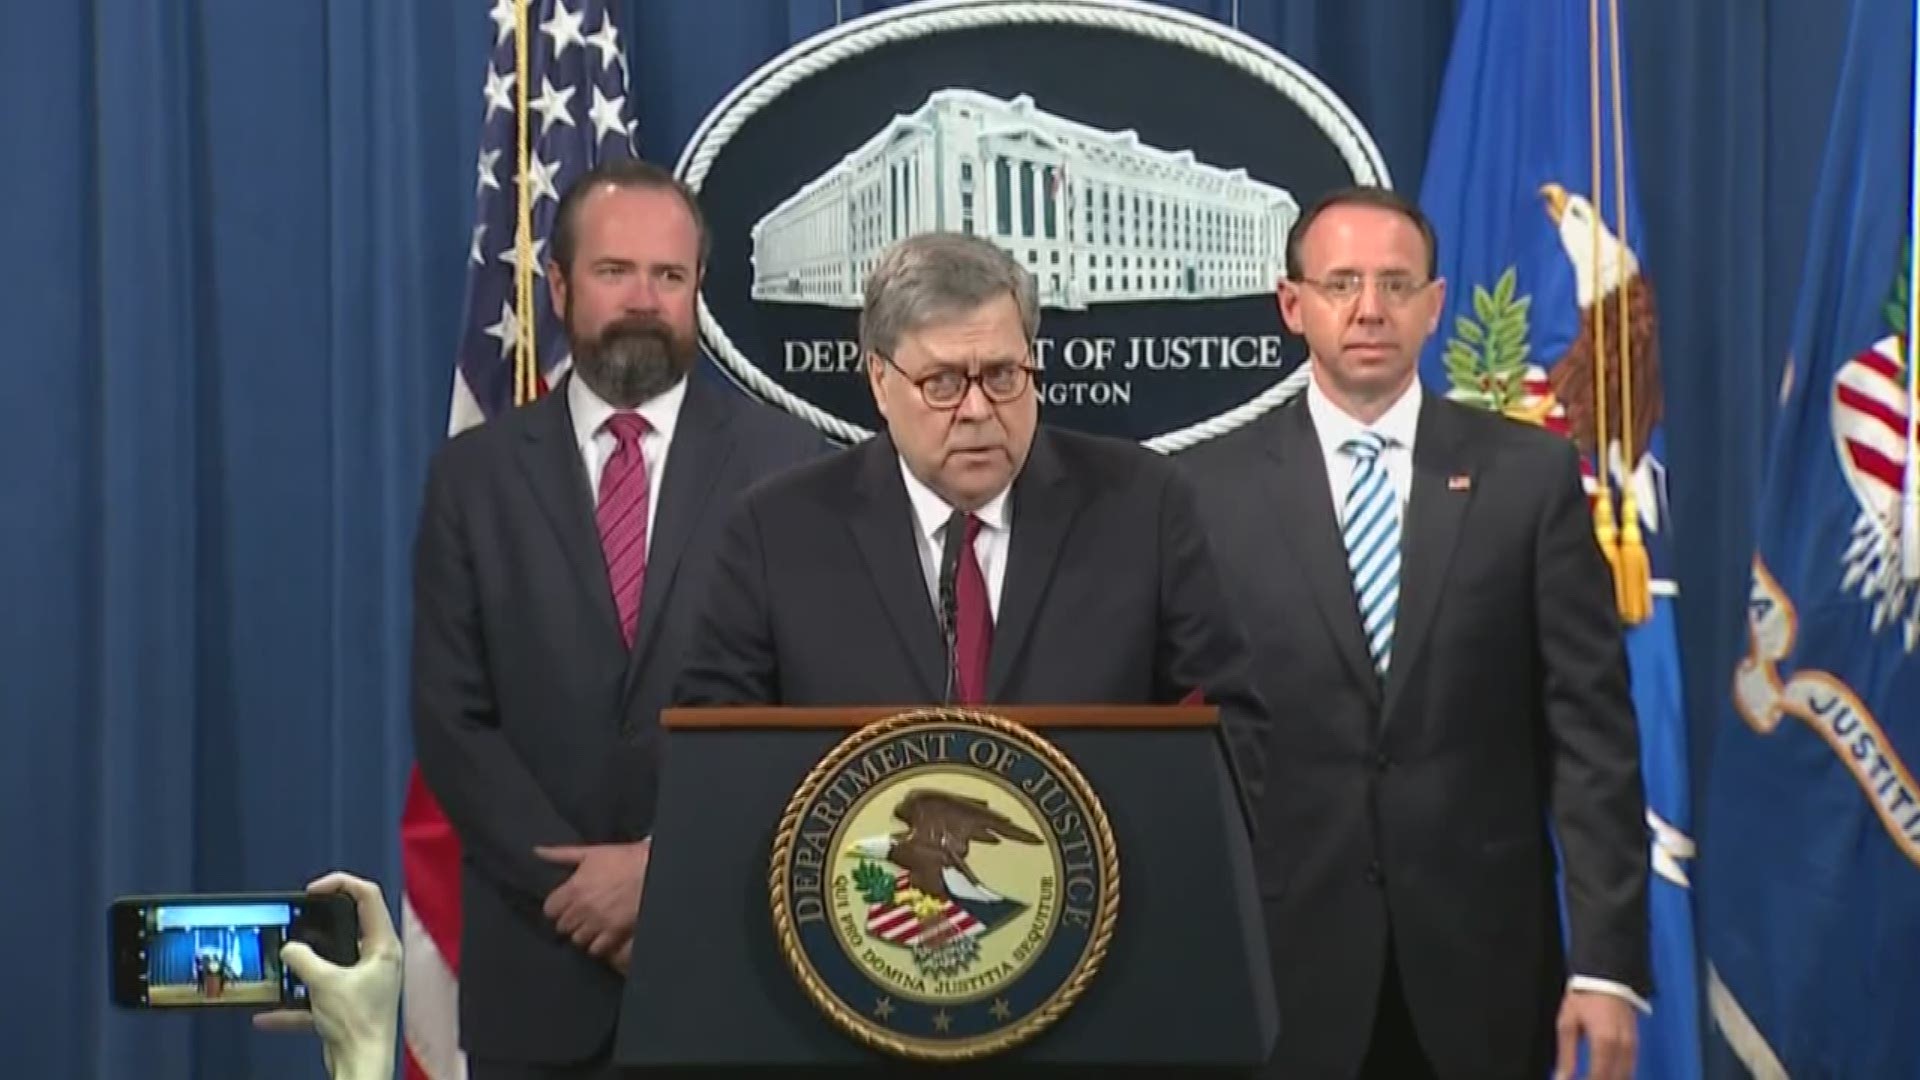 U.S. Attorney General William Barr held a press conference Thursday to discuss the release of special counsel Mueller's report.